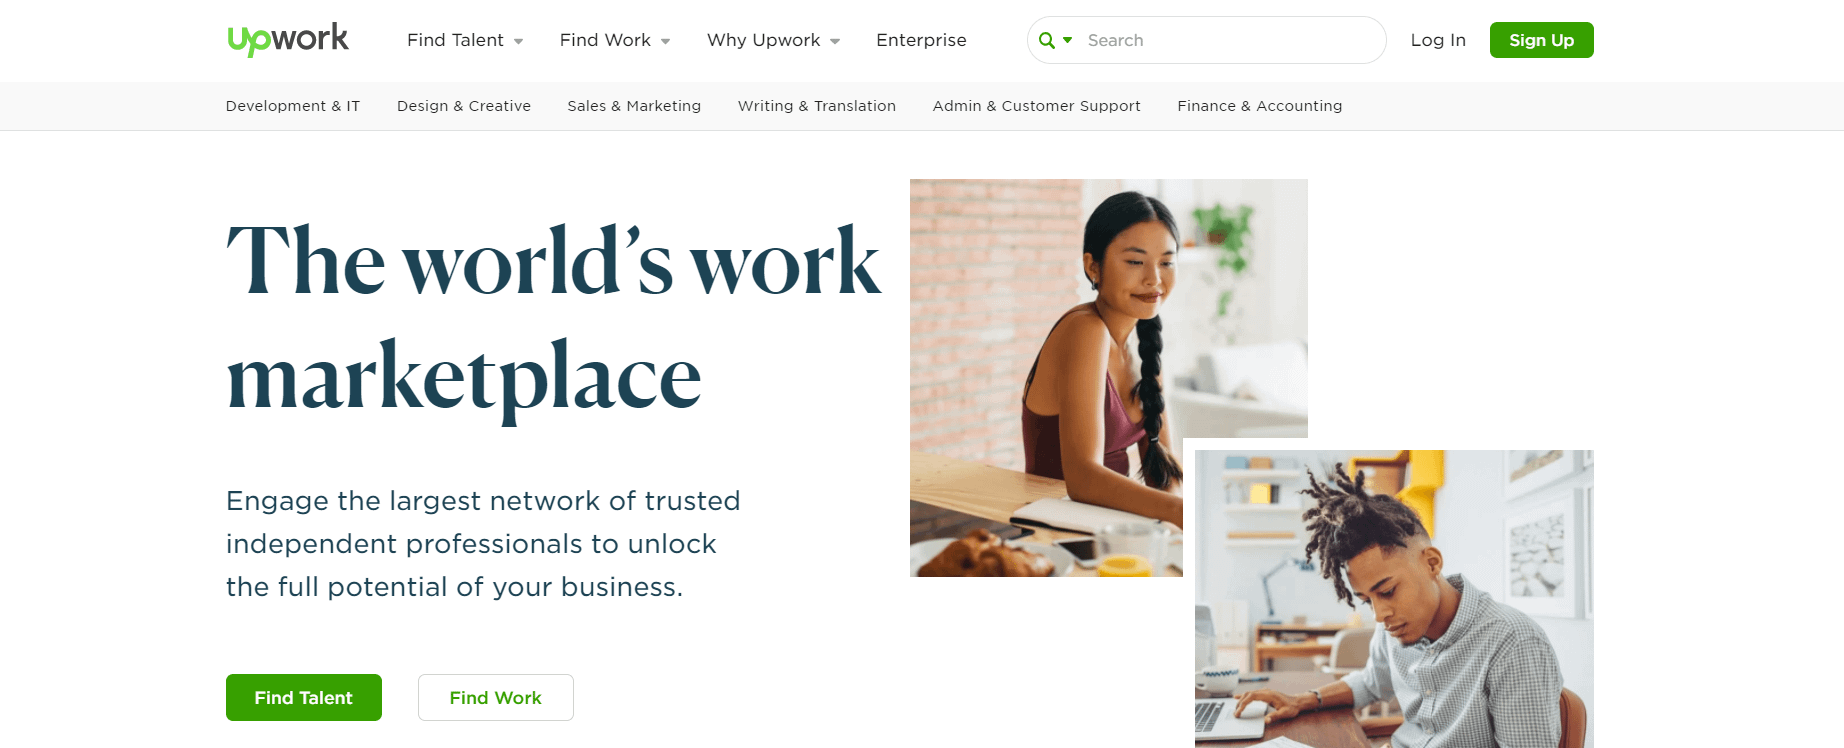 The Upwork home page.